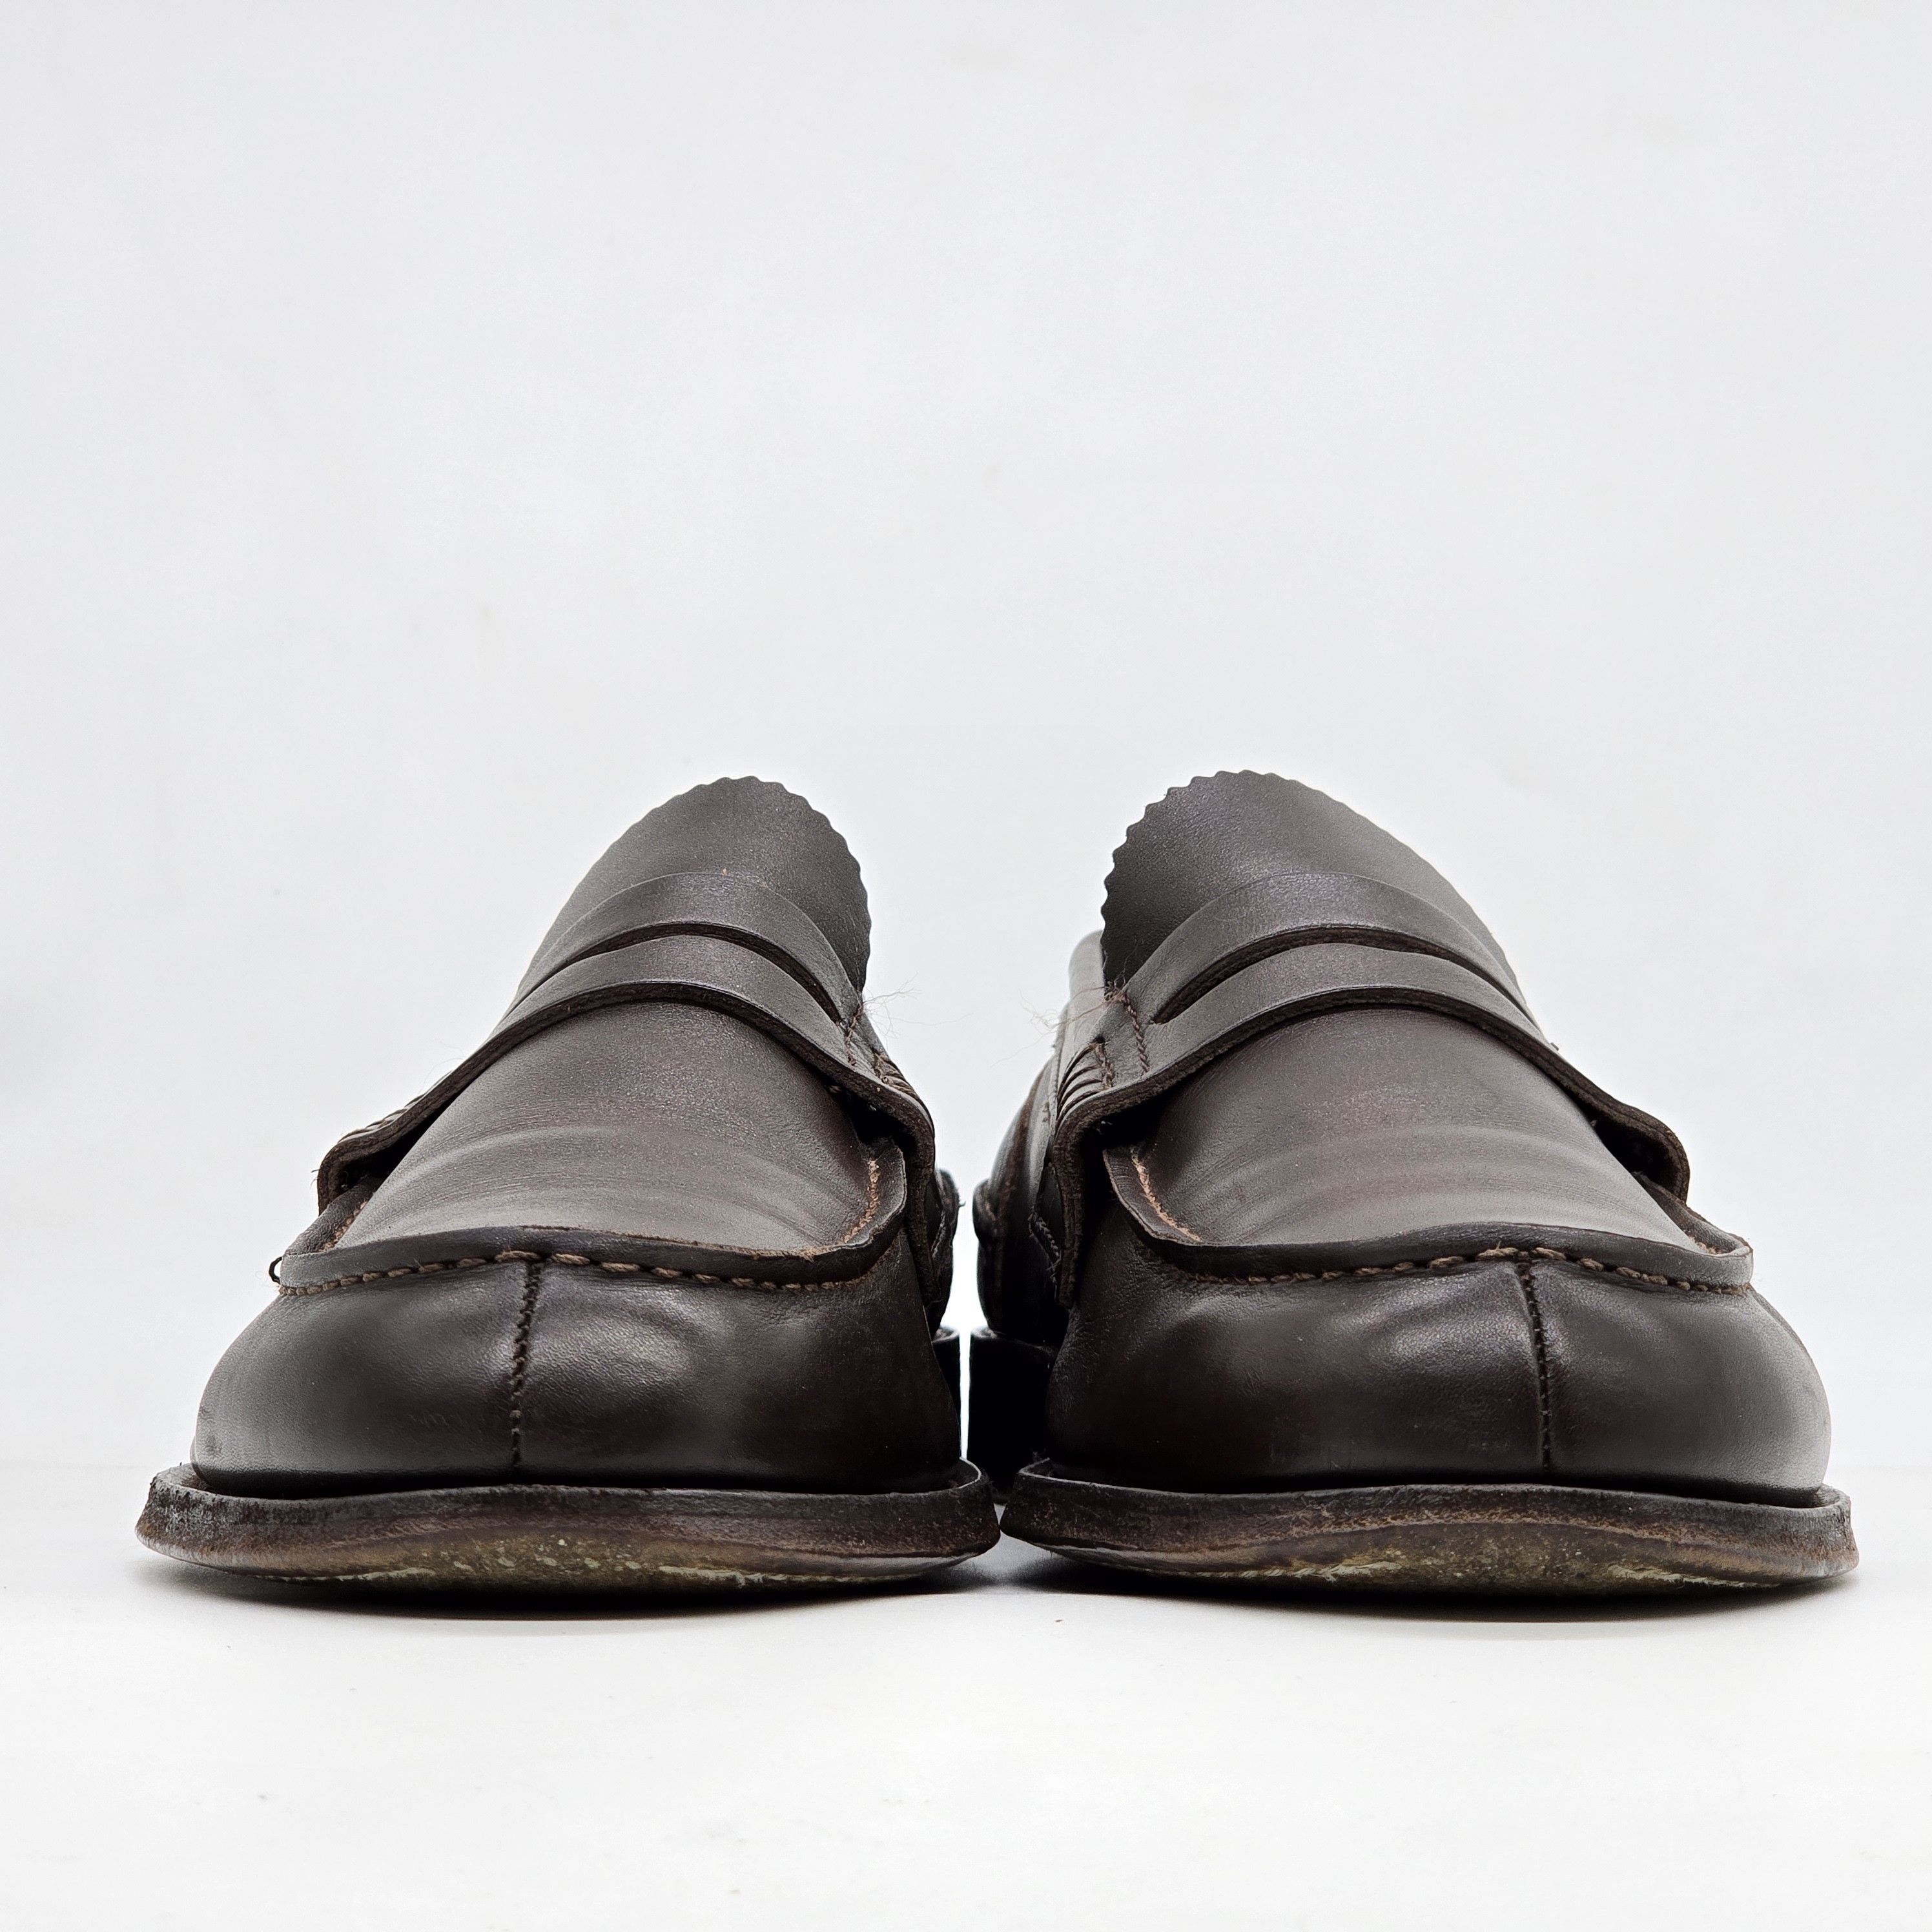 Churchs - Pembrey Leather Loafers - 2